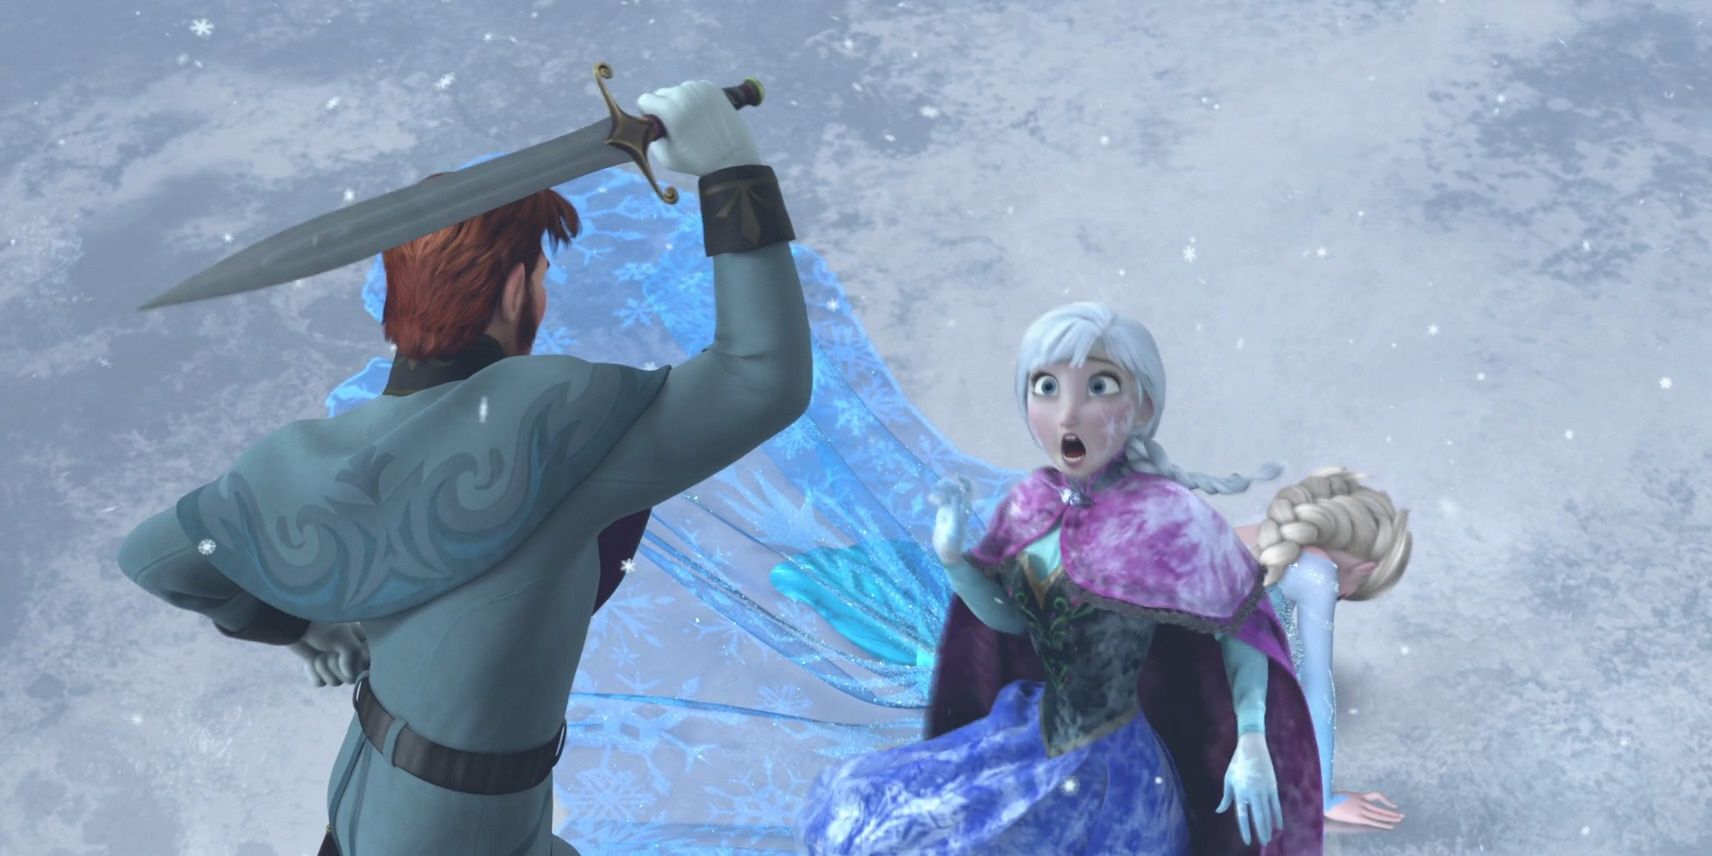 Frozen Anna freezes and Hans and Elsa fight